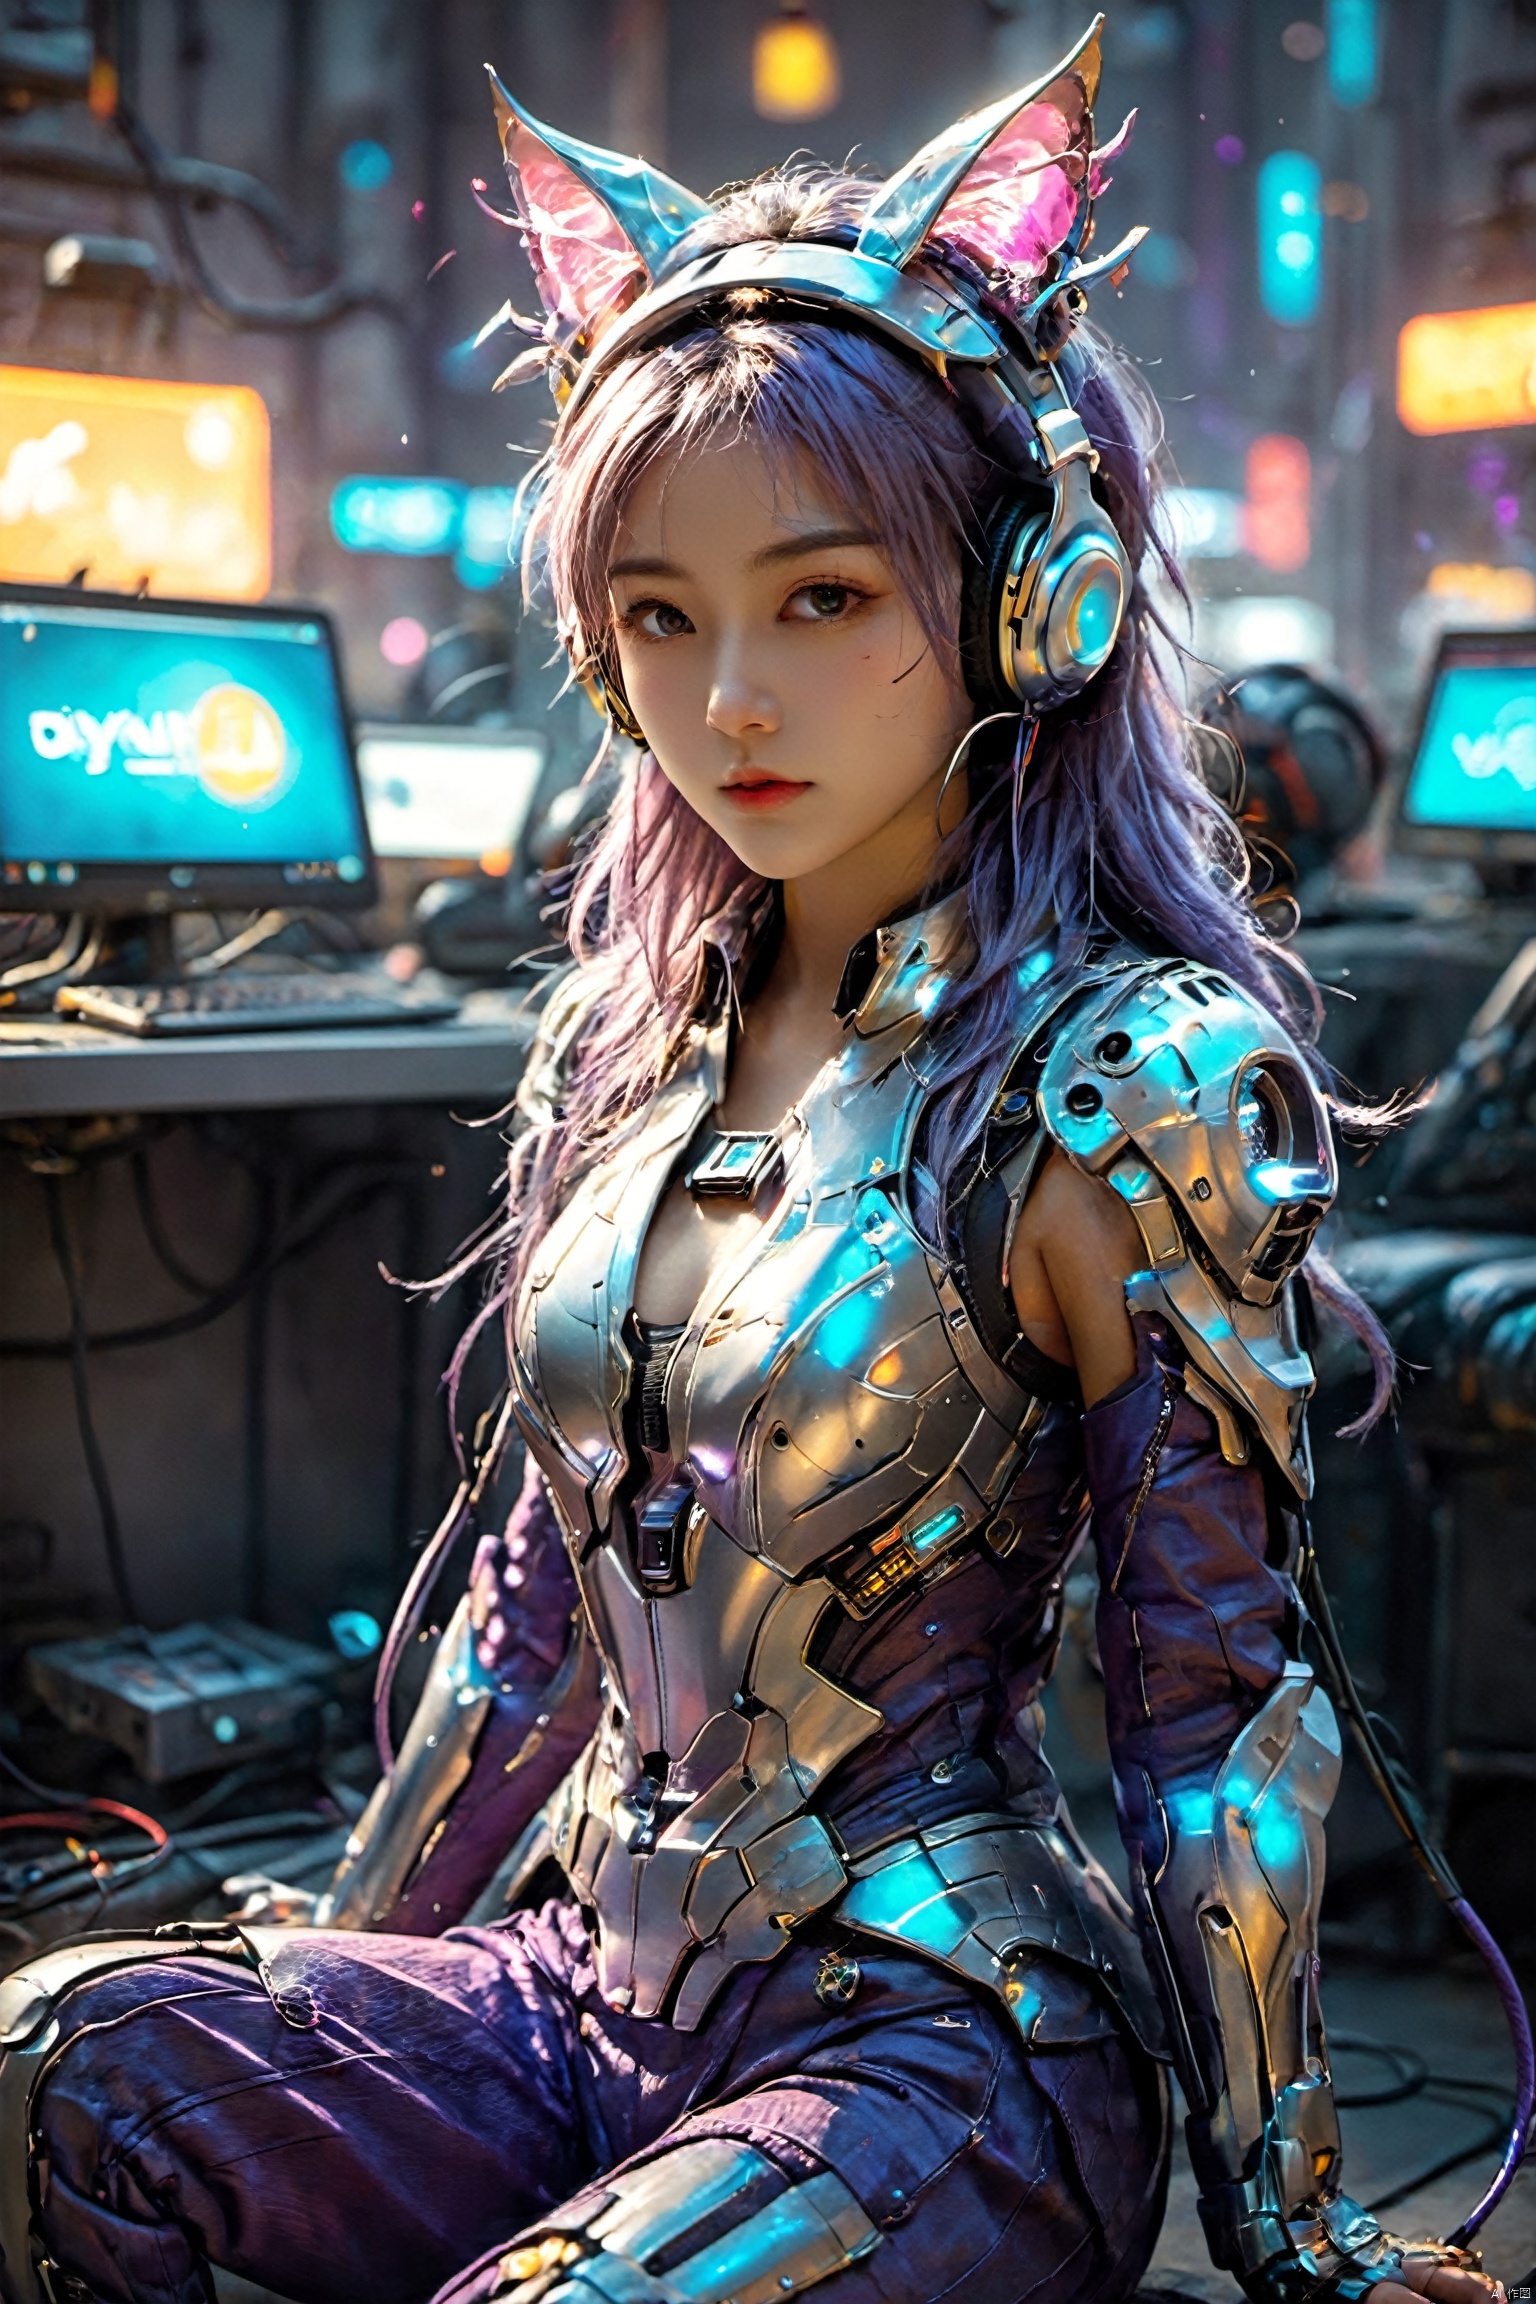  Optical particle,1girl,Future style gel coat,Future Combat Suit,animal ears,bodysuit,breasts,cat ear headphones,computer,hand on headphones,Glowing Clothing,Future Technology Space Station,full body,Sitting posture,Clothing with multiple light sources,headphones,headset,laptop,long hair,looking at viewer,motor vehicle,robot ears,science fiction,sitting,solo,Purple hair, glow, BY MOONCRYPTOWOW,(holographic projection), (cyberpunk style), (mechanical modular background), (Luminous circuit) (Flashing neon light) (Blue illuminated background) (Background blurring treatment), Light-electric style,shining,